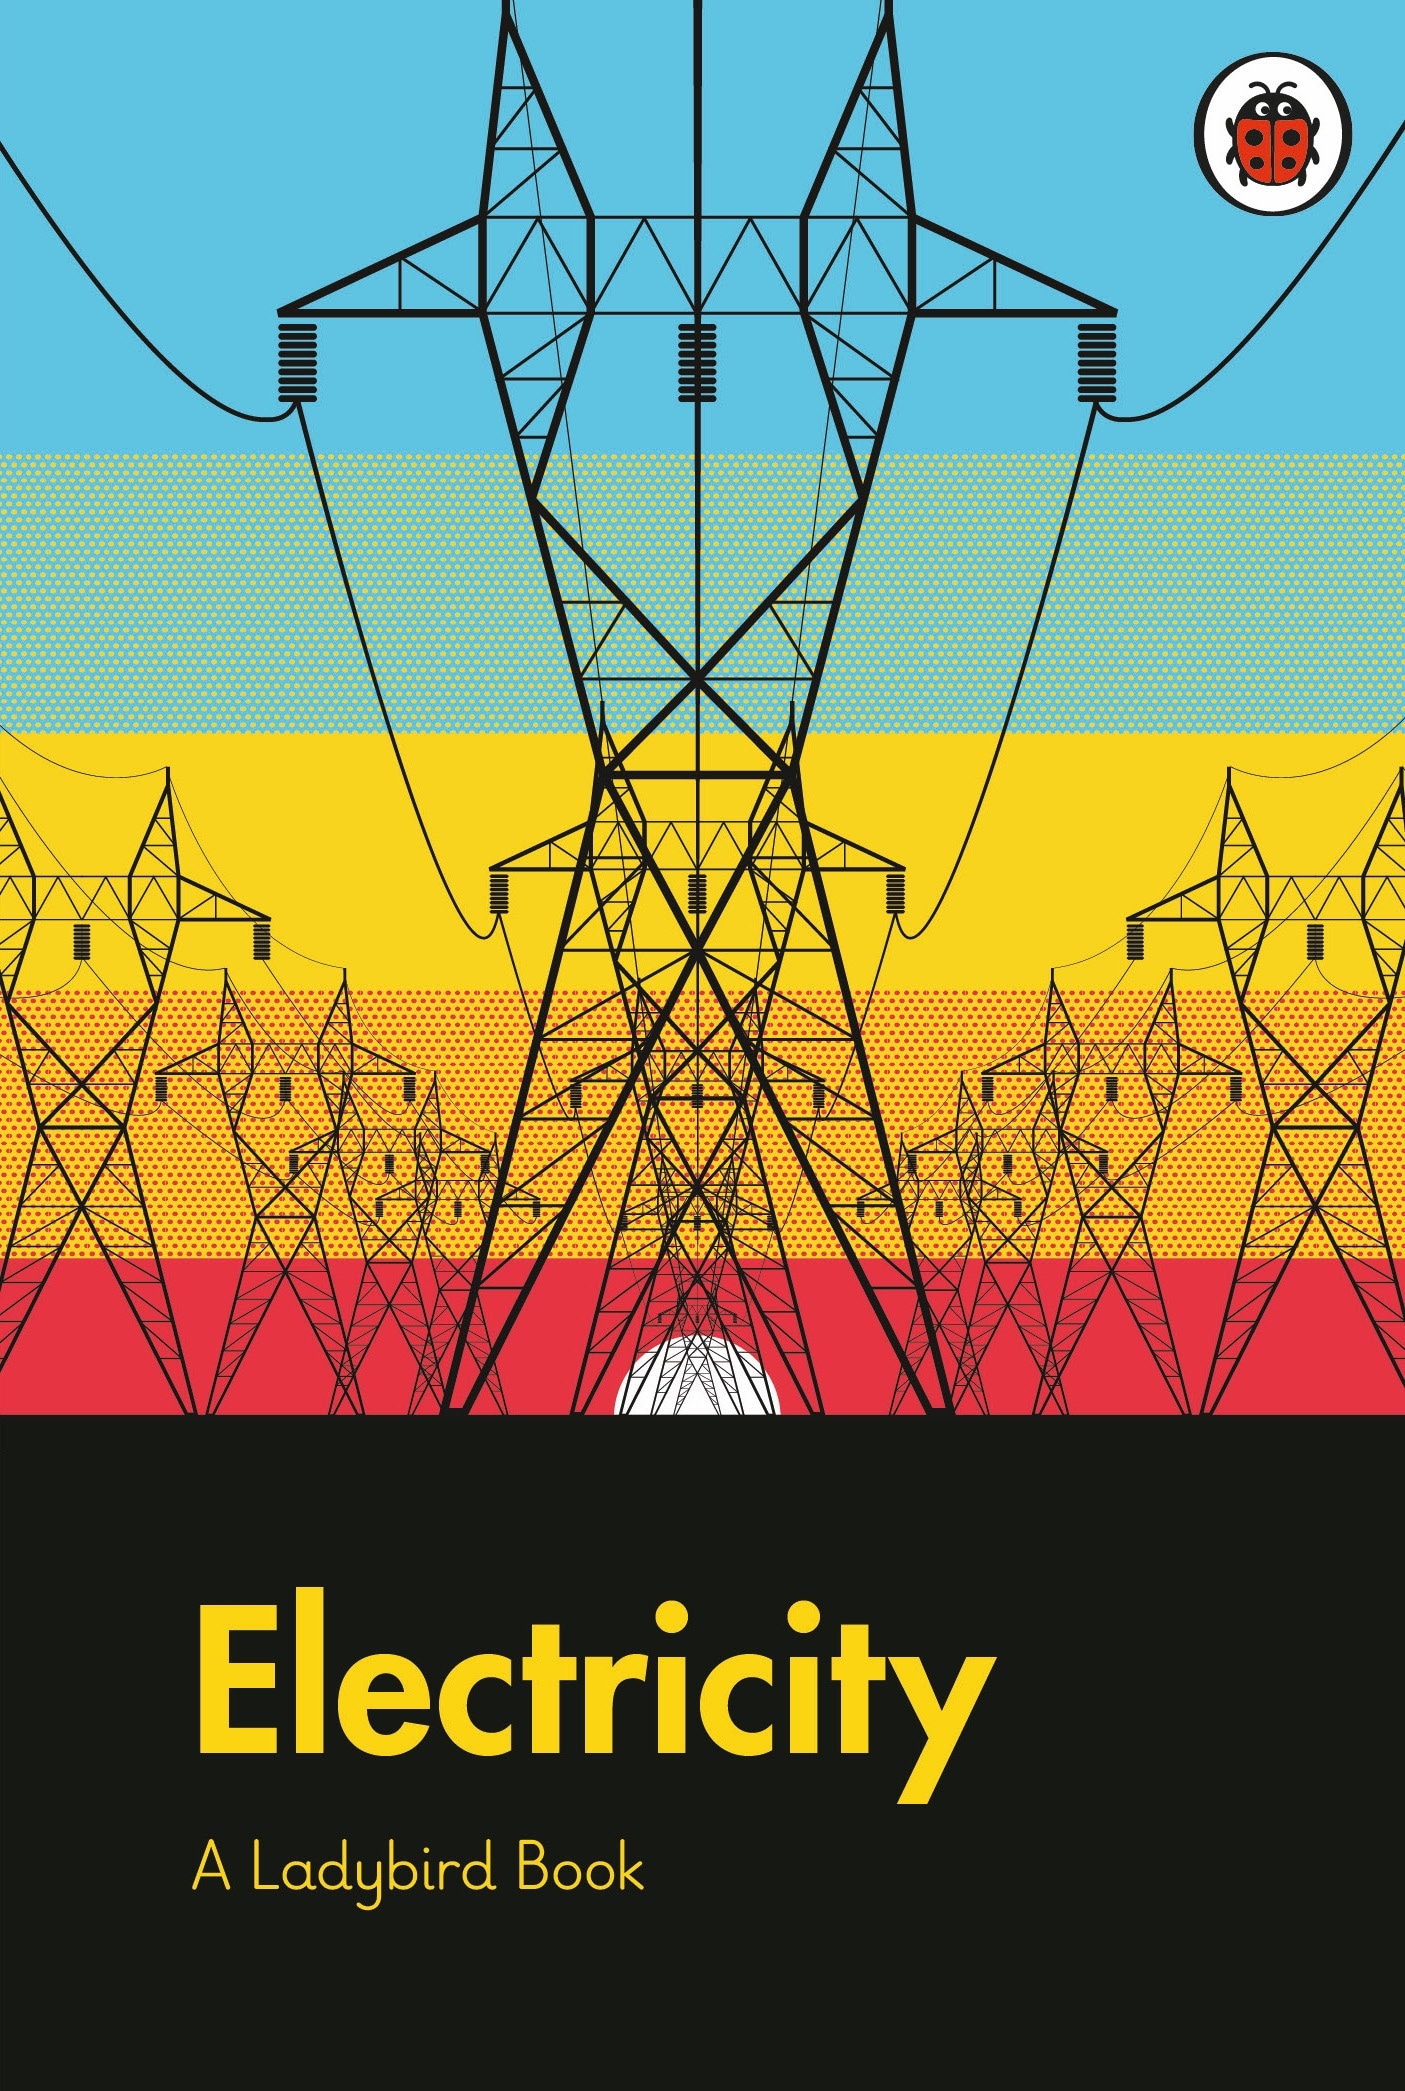 Book “A Ladybird Book: Electricity” by Elizabeth Jenner, Brave The Woods — August 5, 2021